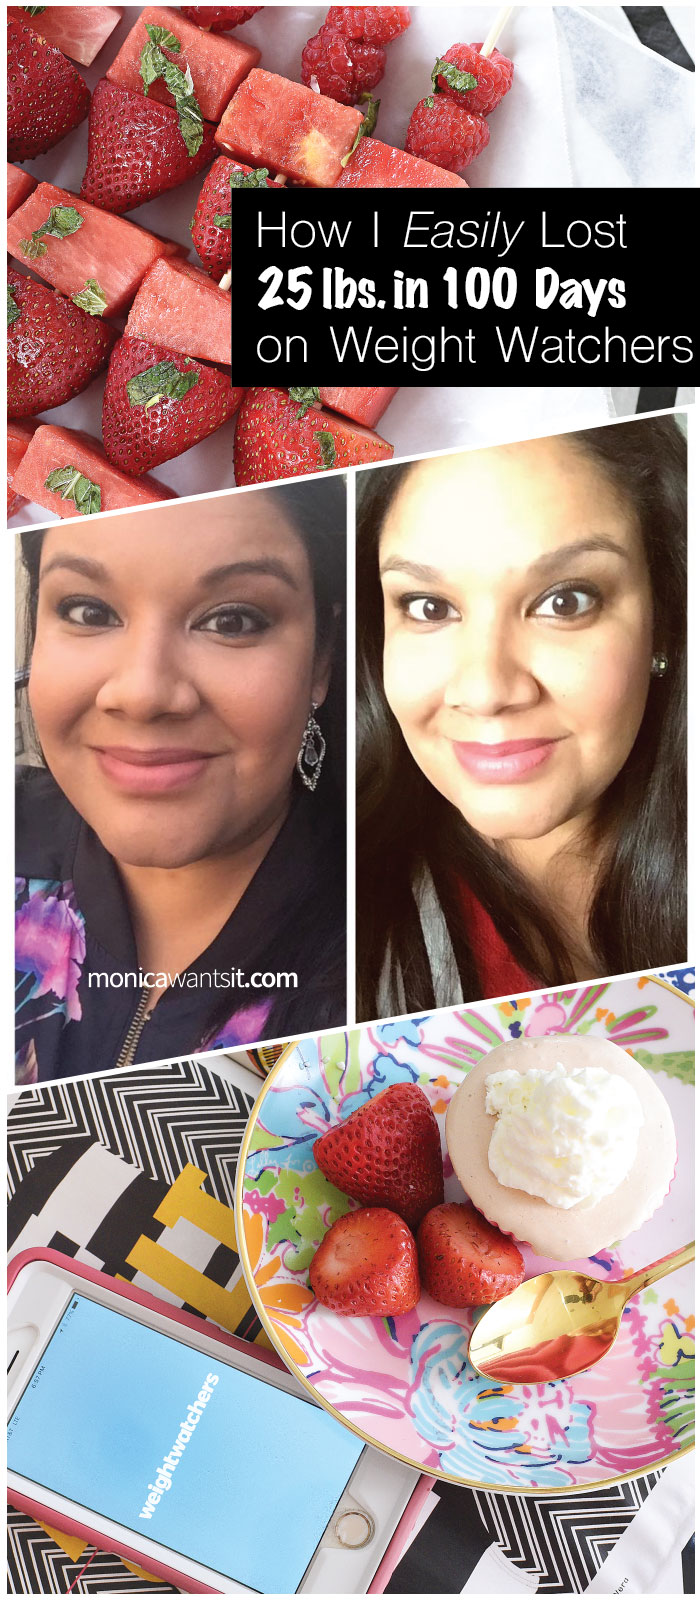 A blogger gets candid about her first 100 days on Weight Watchers SmartPoints and talks about tips/tricks to lose about 1 pound every 4 days. Inspiring story and practical tips! 